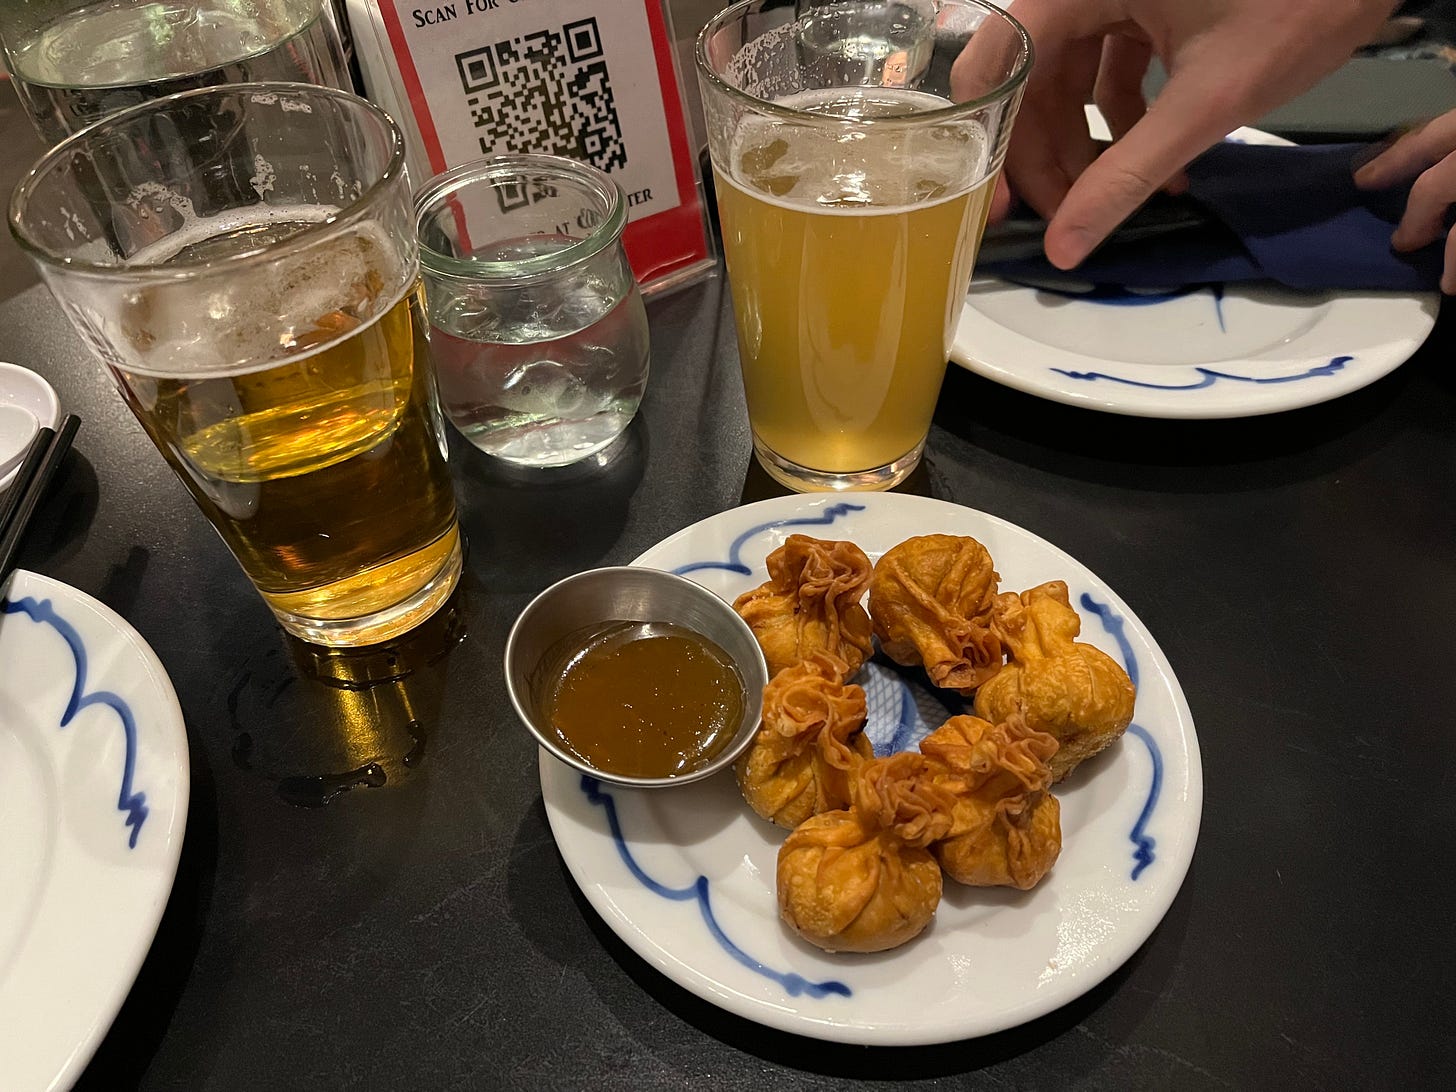 On a black table, there's a white porcelain plate with six golden, deep-fried dumplings. The dumpling wrappers are crisp and bubbly. Also on the plate there's a dish of dipping sauce, which is brown. There are cups of beer and water on either side of this plate.